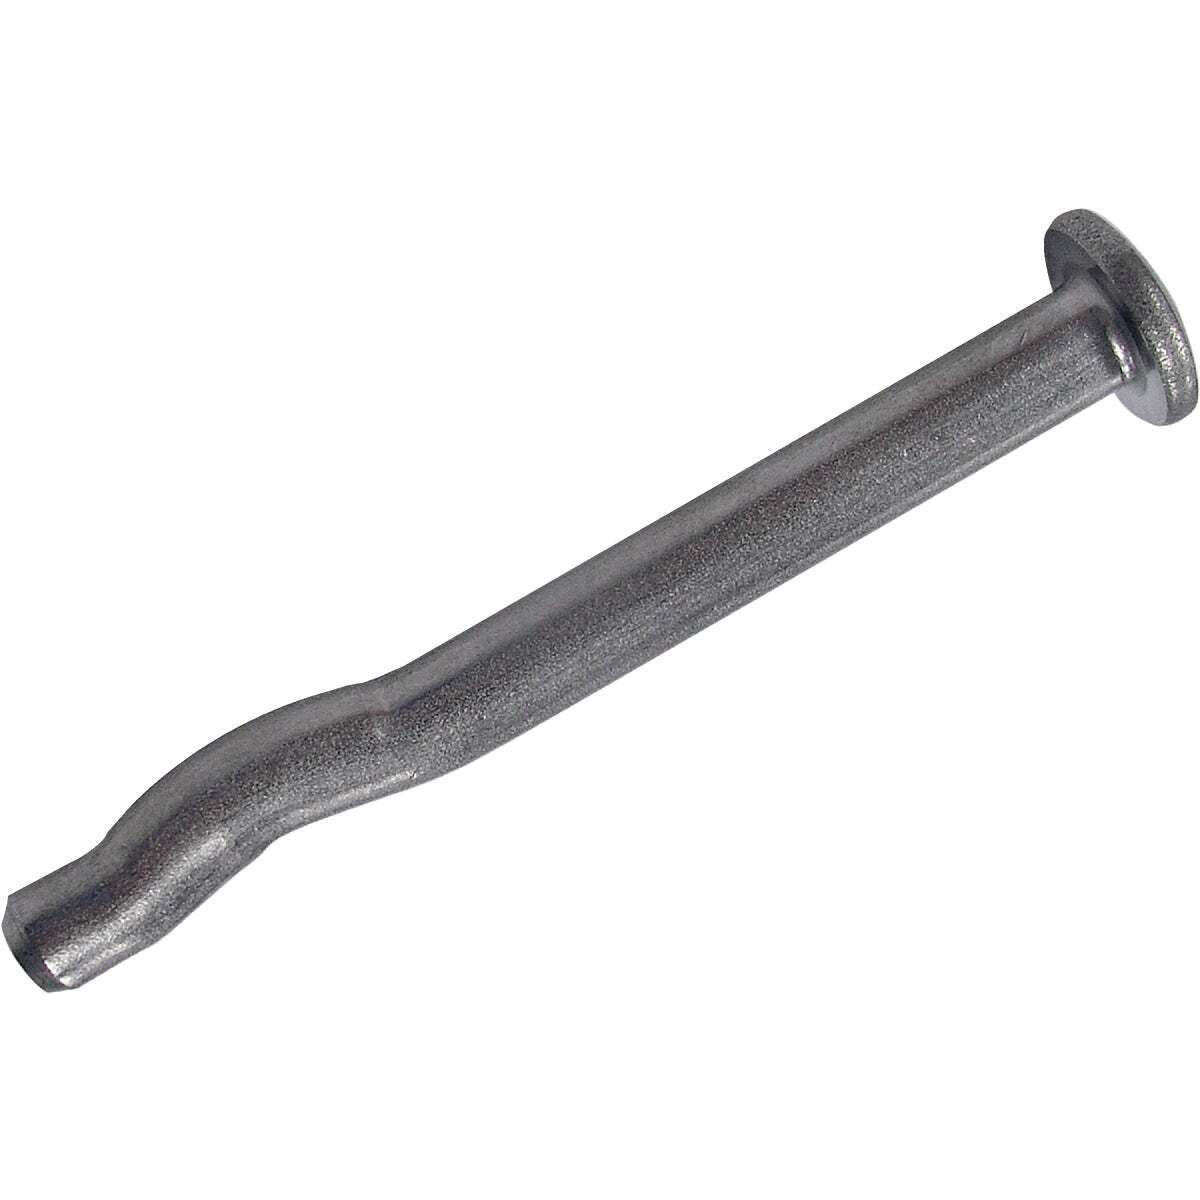 Hillman 1/4 In. X 2-1/2 In. Zinc Rawl Spike Concrete Anchor (50-count) 371182